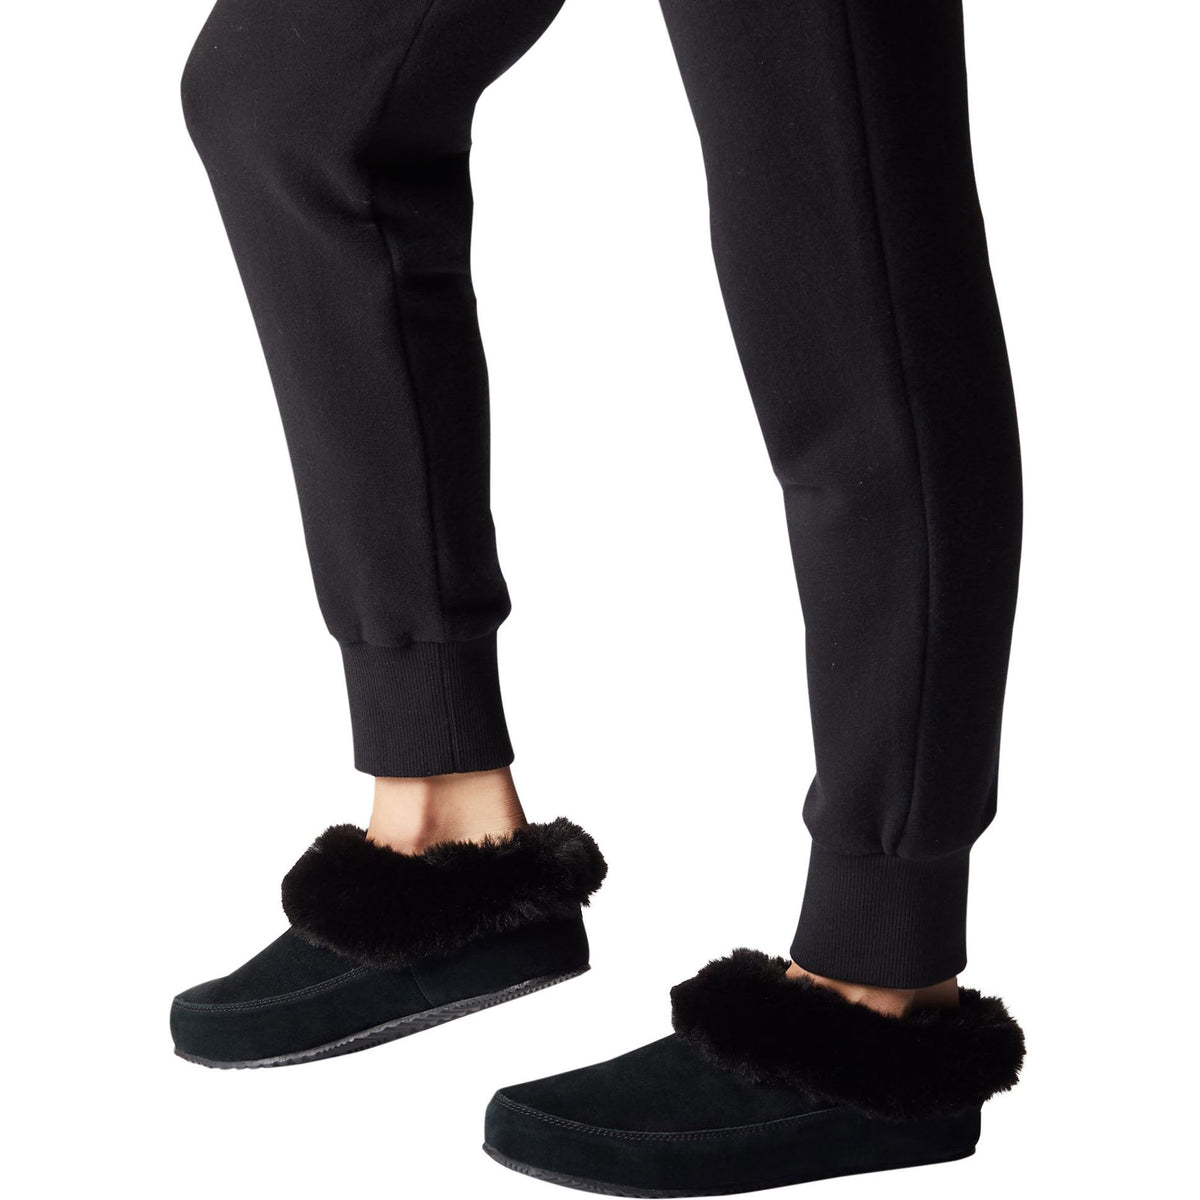 A person standing in black trousers paired with Sorel GO Coffee Run Black slippers designed with a tough sole for quick trips outside.